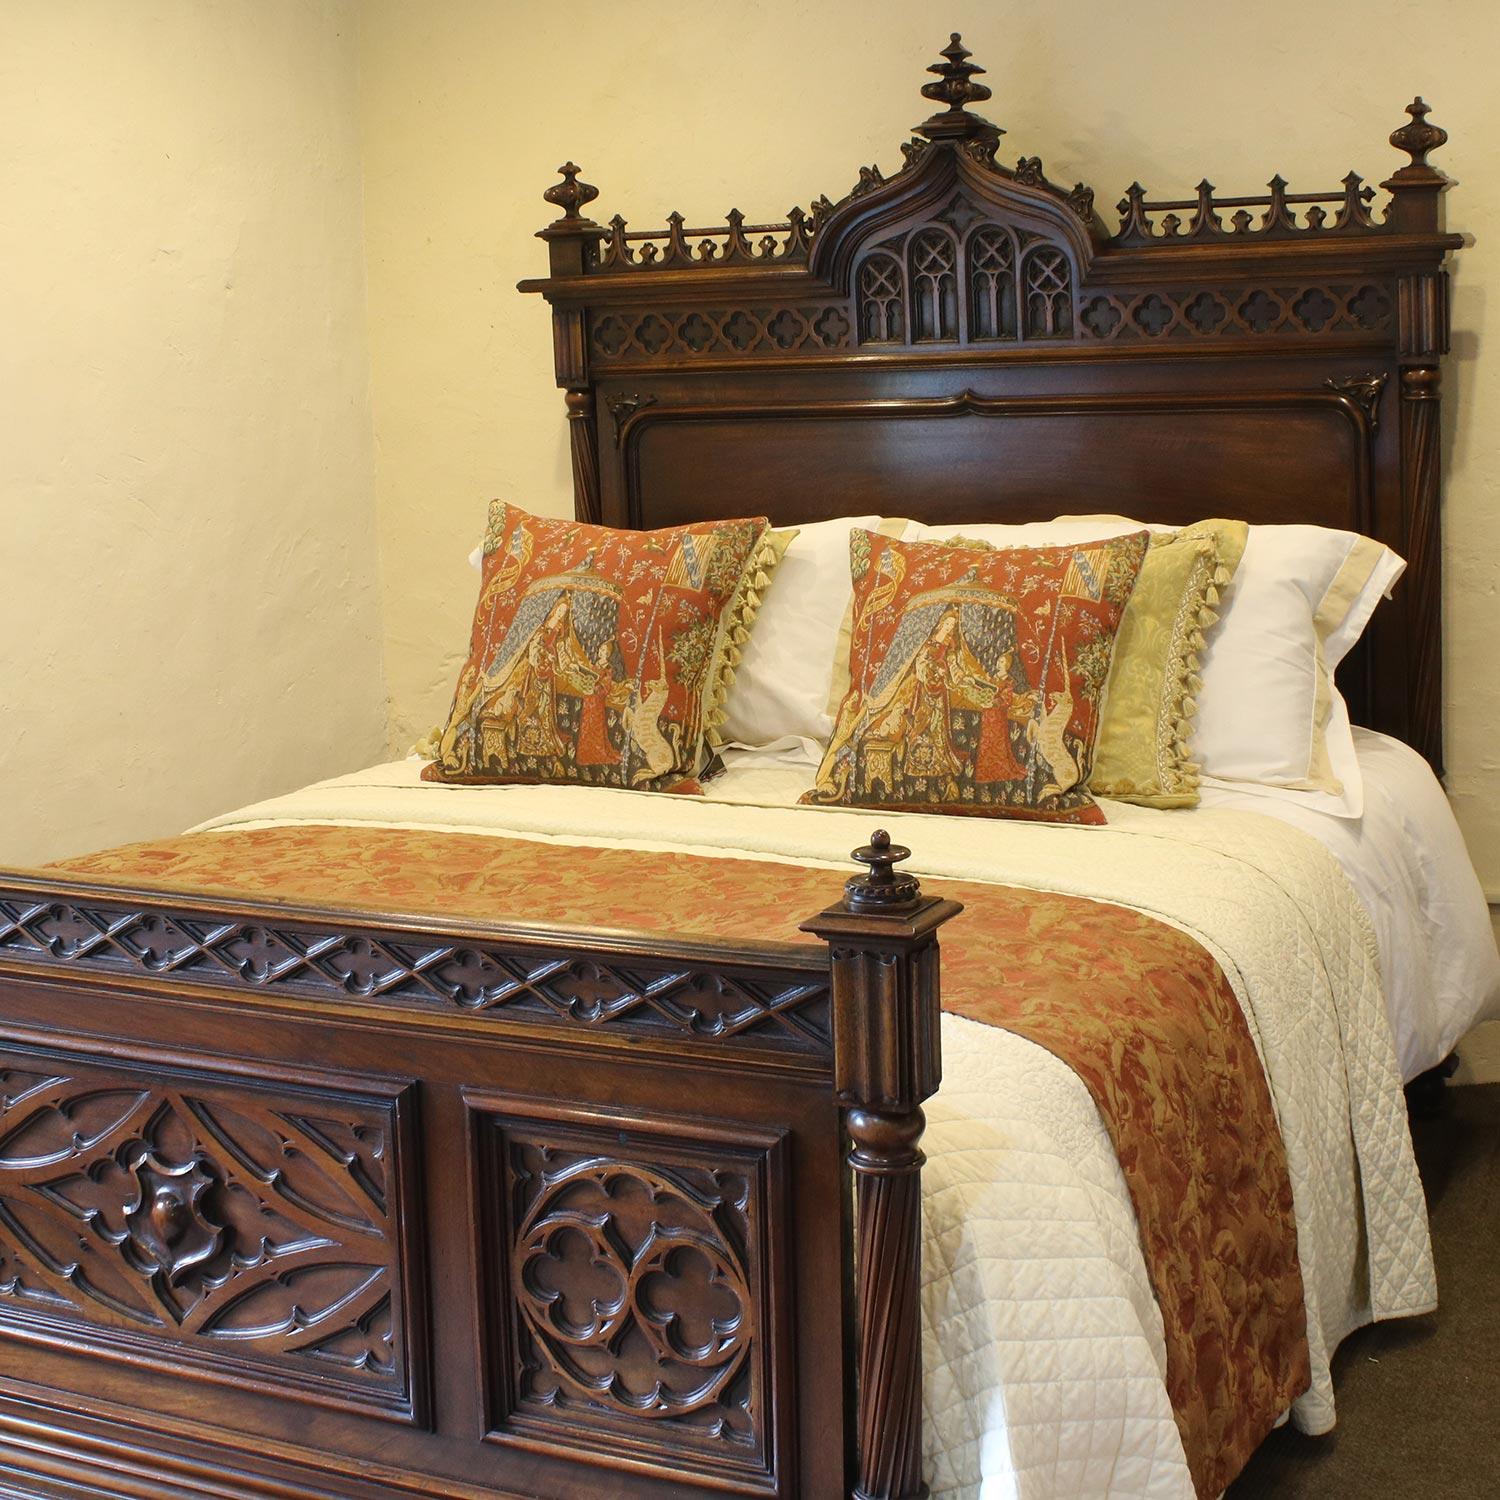 This fabulous Gothic inspired bed has superb carving in the head and foot including linen folds, fleur-de-lys and quatrefoils, typical of the style. The architectural form is emphasised by the column posts, the cut-out quatrefoils in foot board and